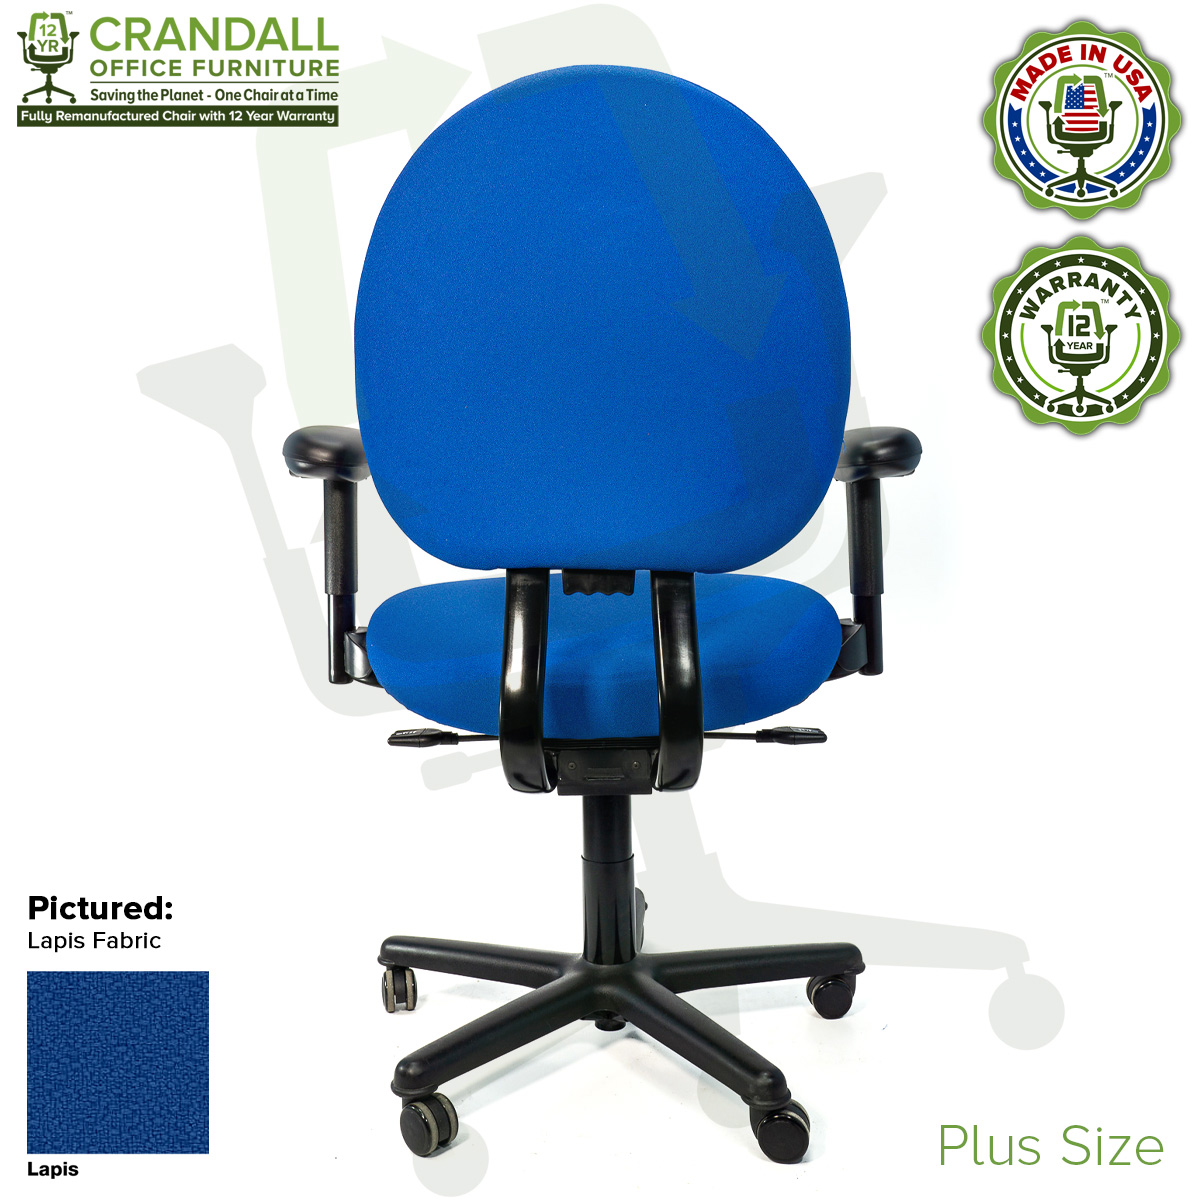 Crandall Office Furniture Remanufactured Steelcase Criterion Plus Chair with 12 Year Warranty - 05